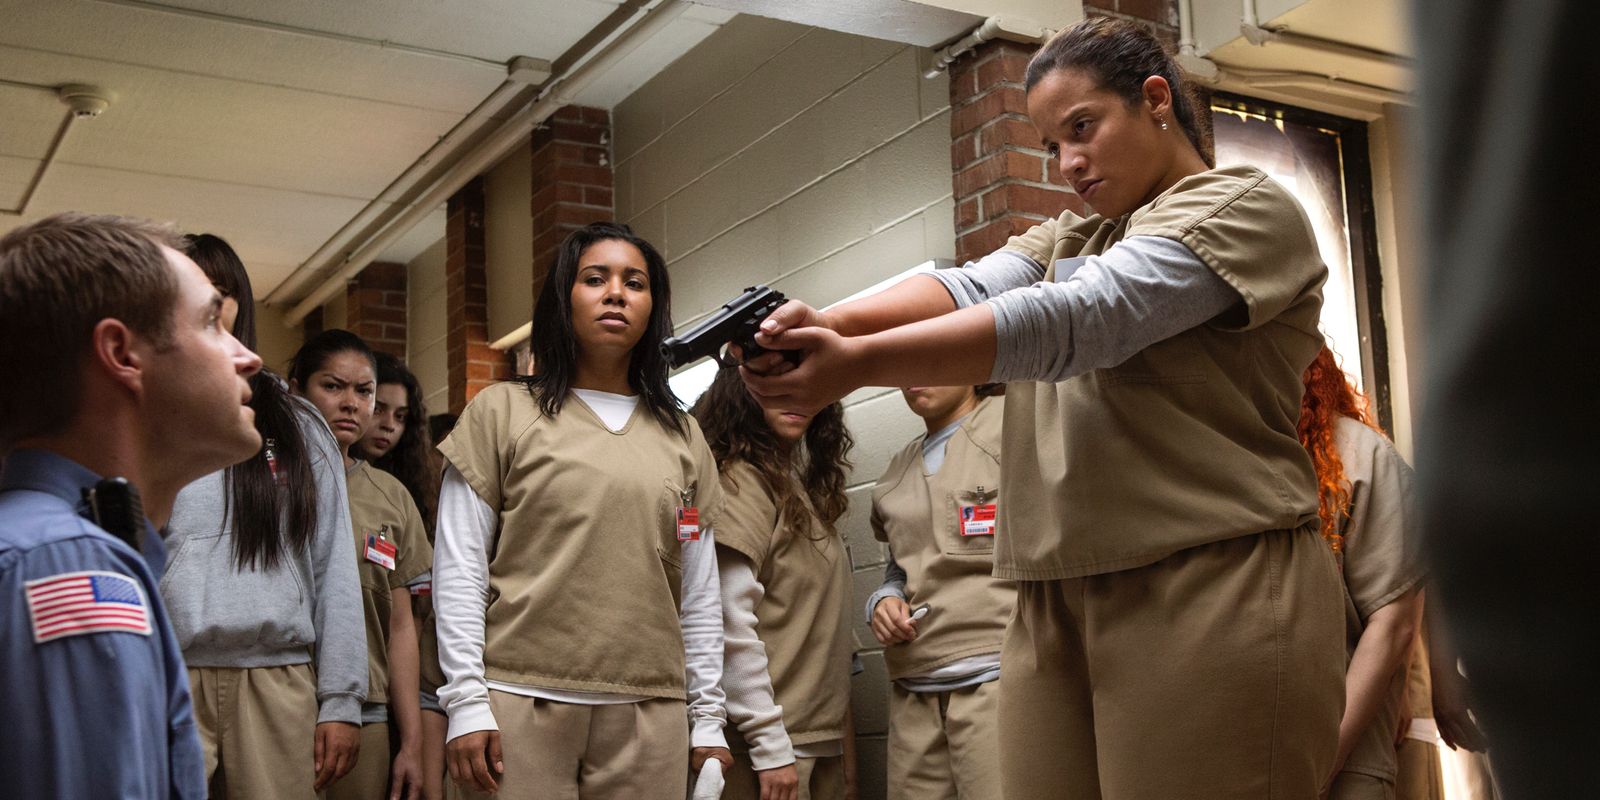 Orange is the New Black Season 5 Finds Its Story By Deviating From the Norm